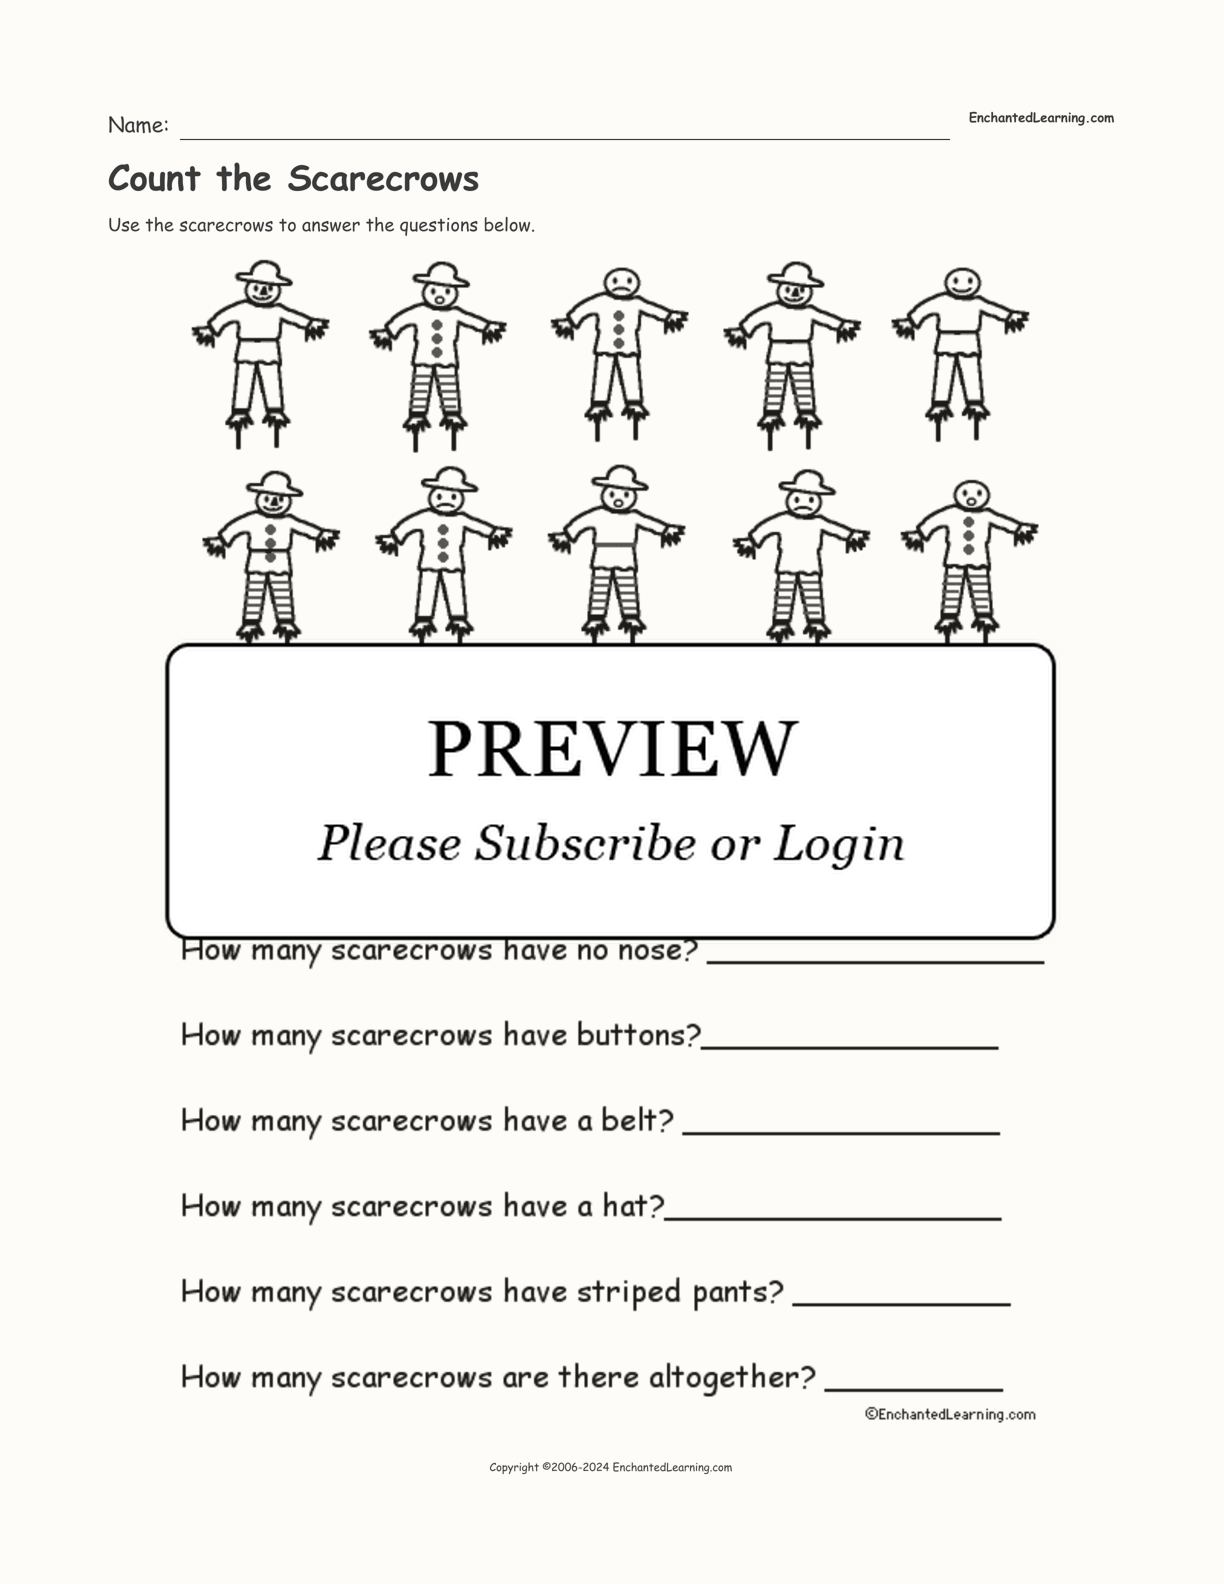 Count the Scarecrows interactive worksheet page 1